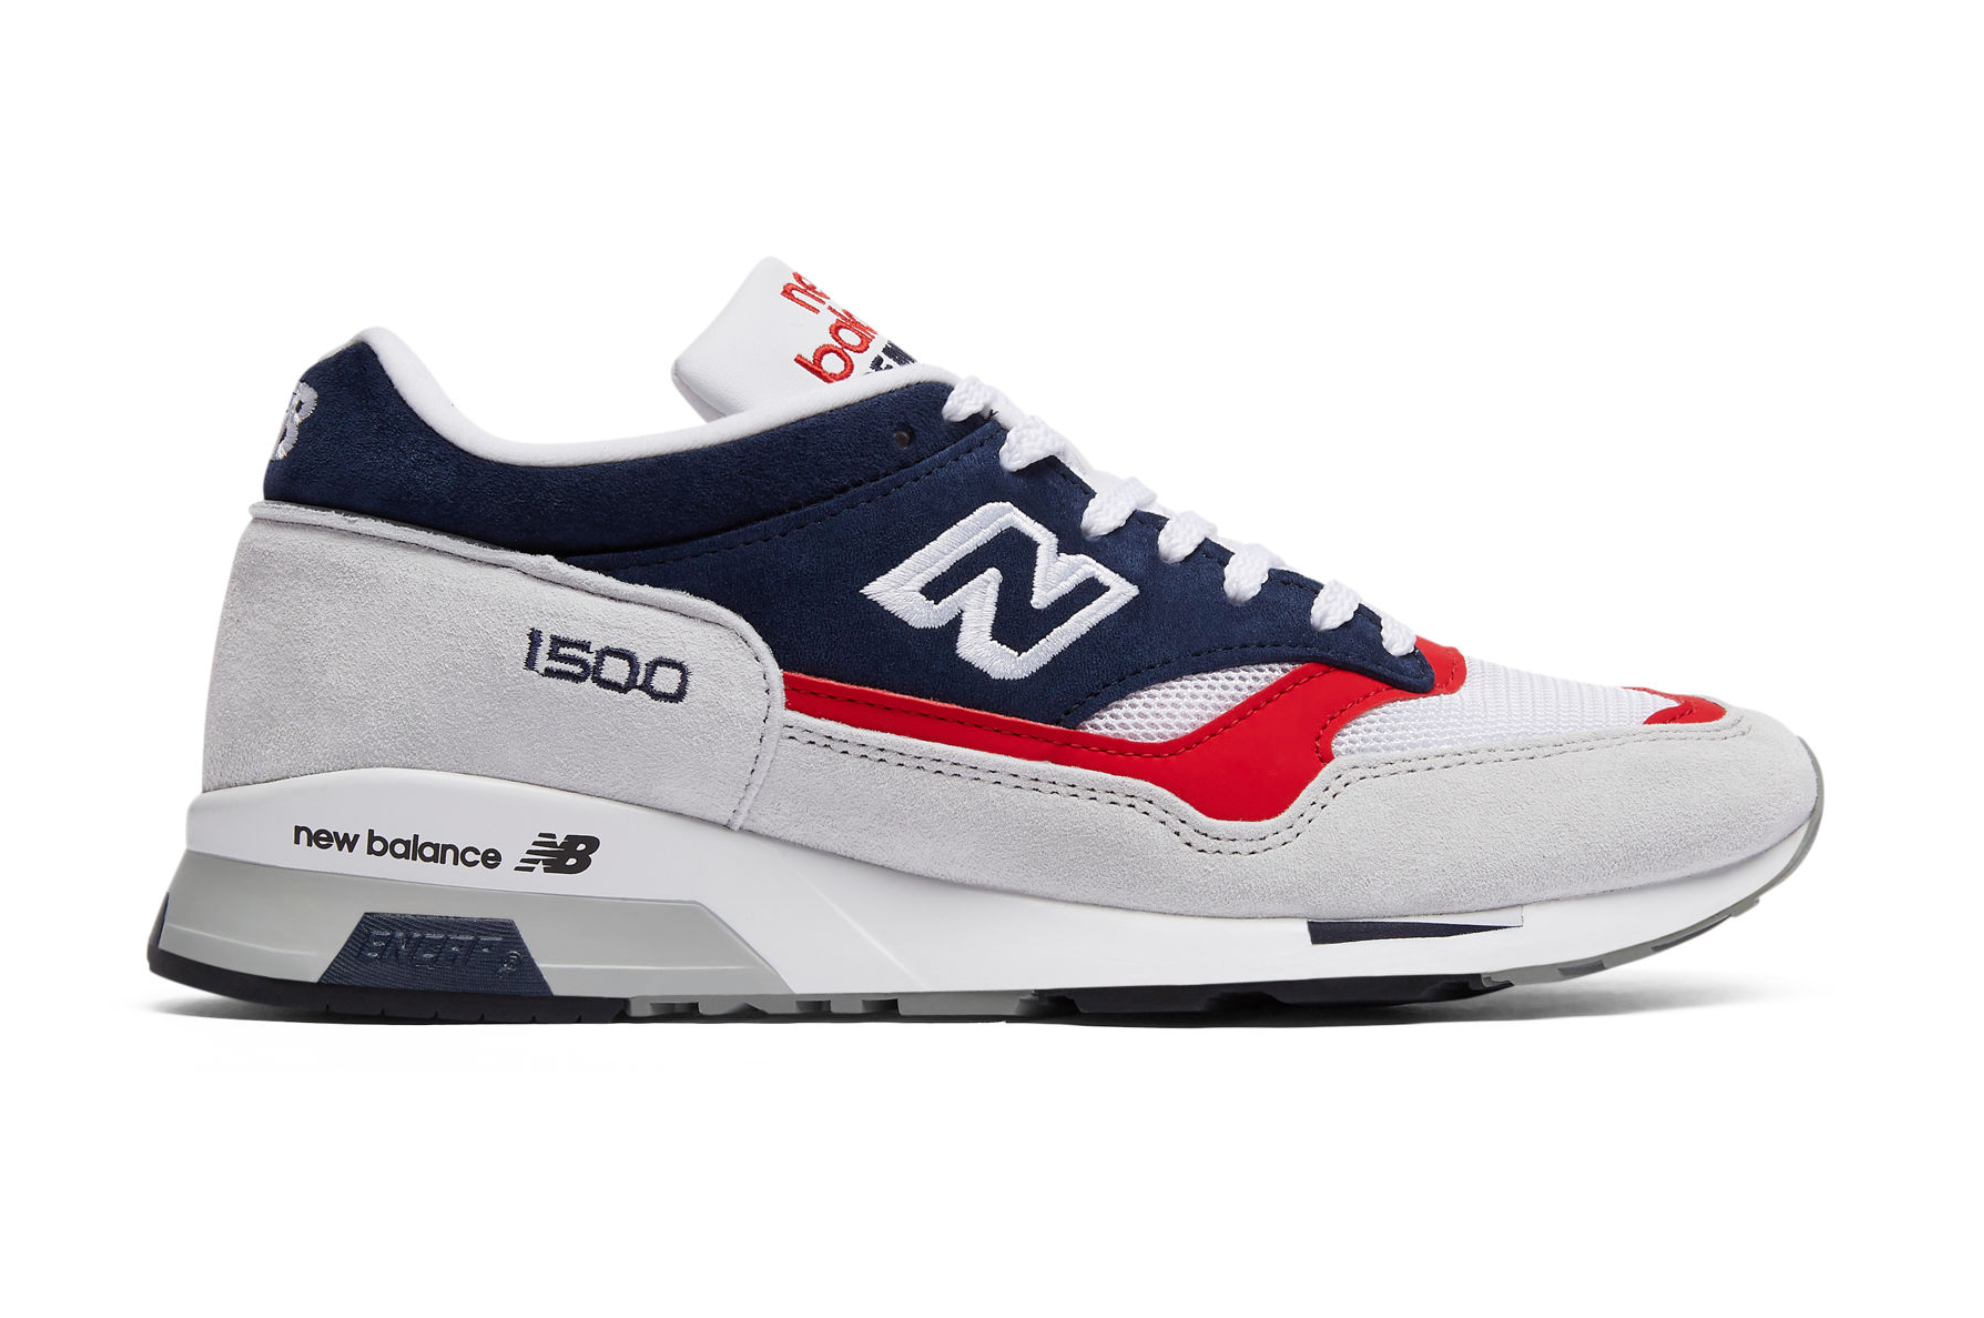 New Balance Keep It Classic With Crisp 1500 And 670 Renditions